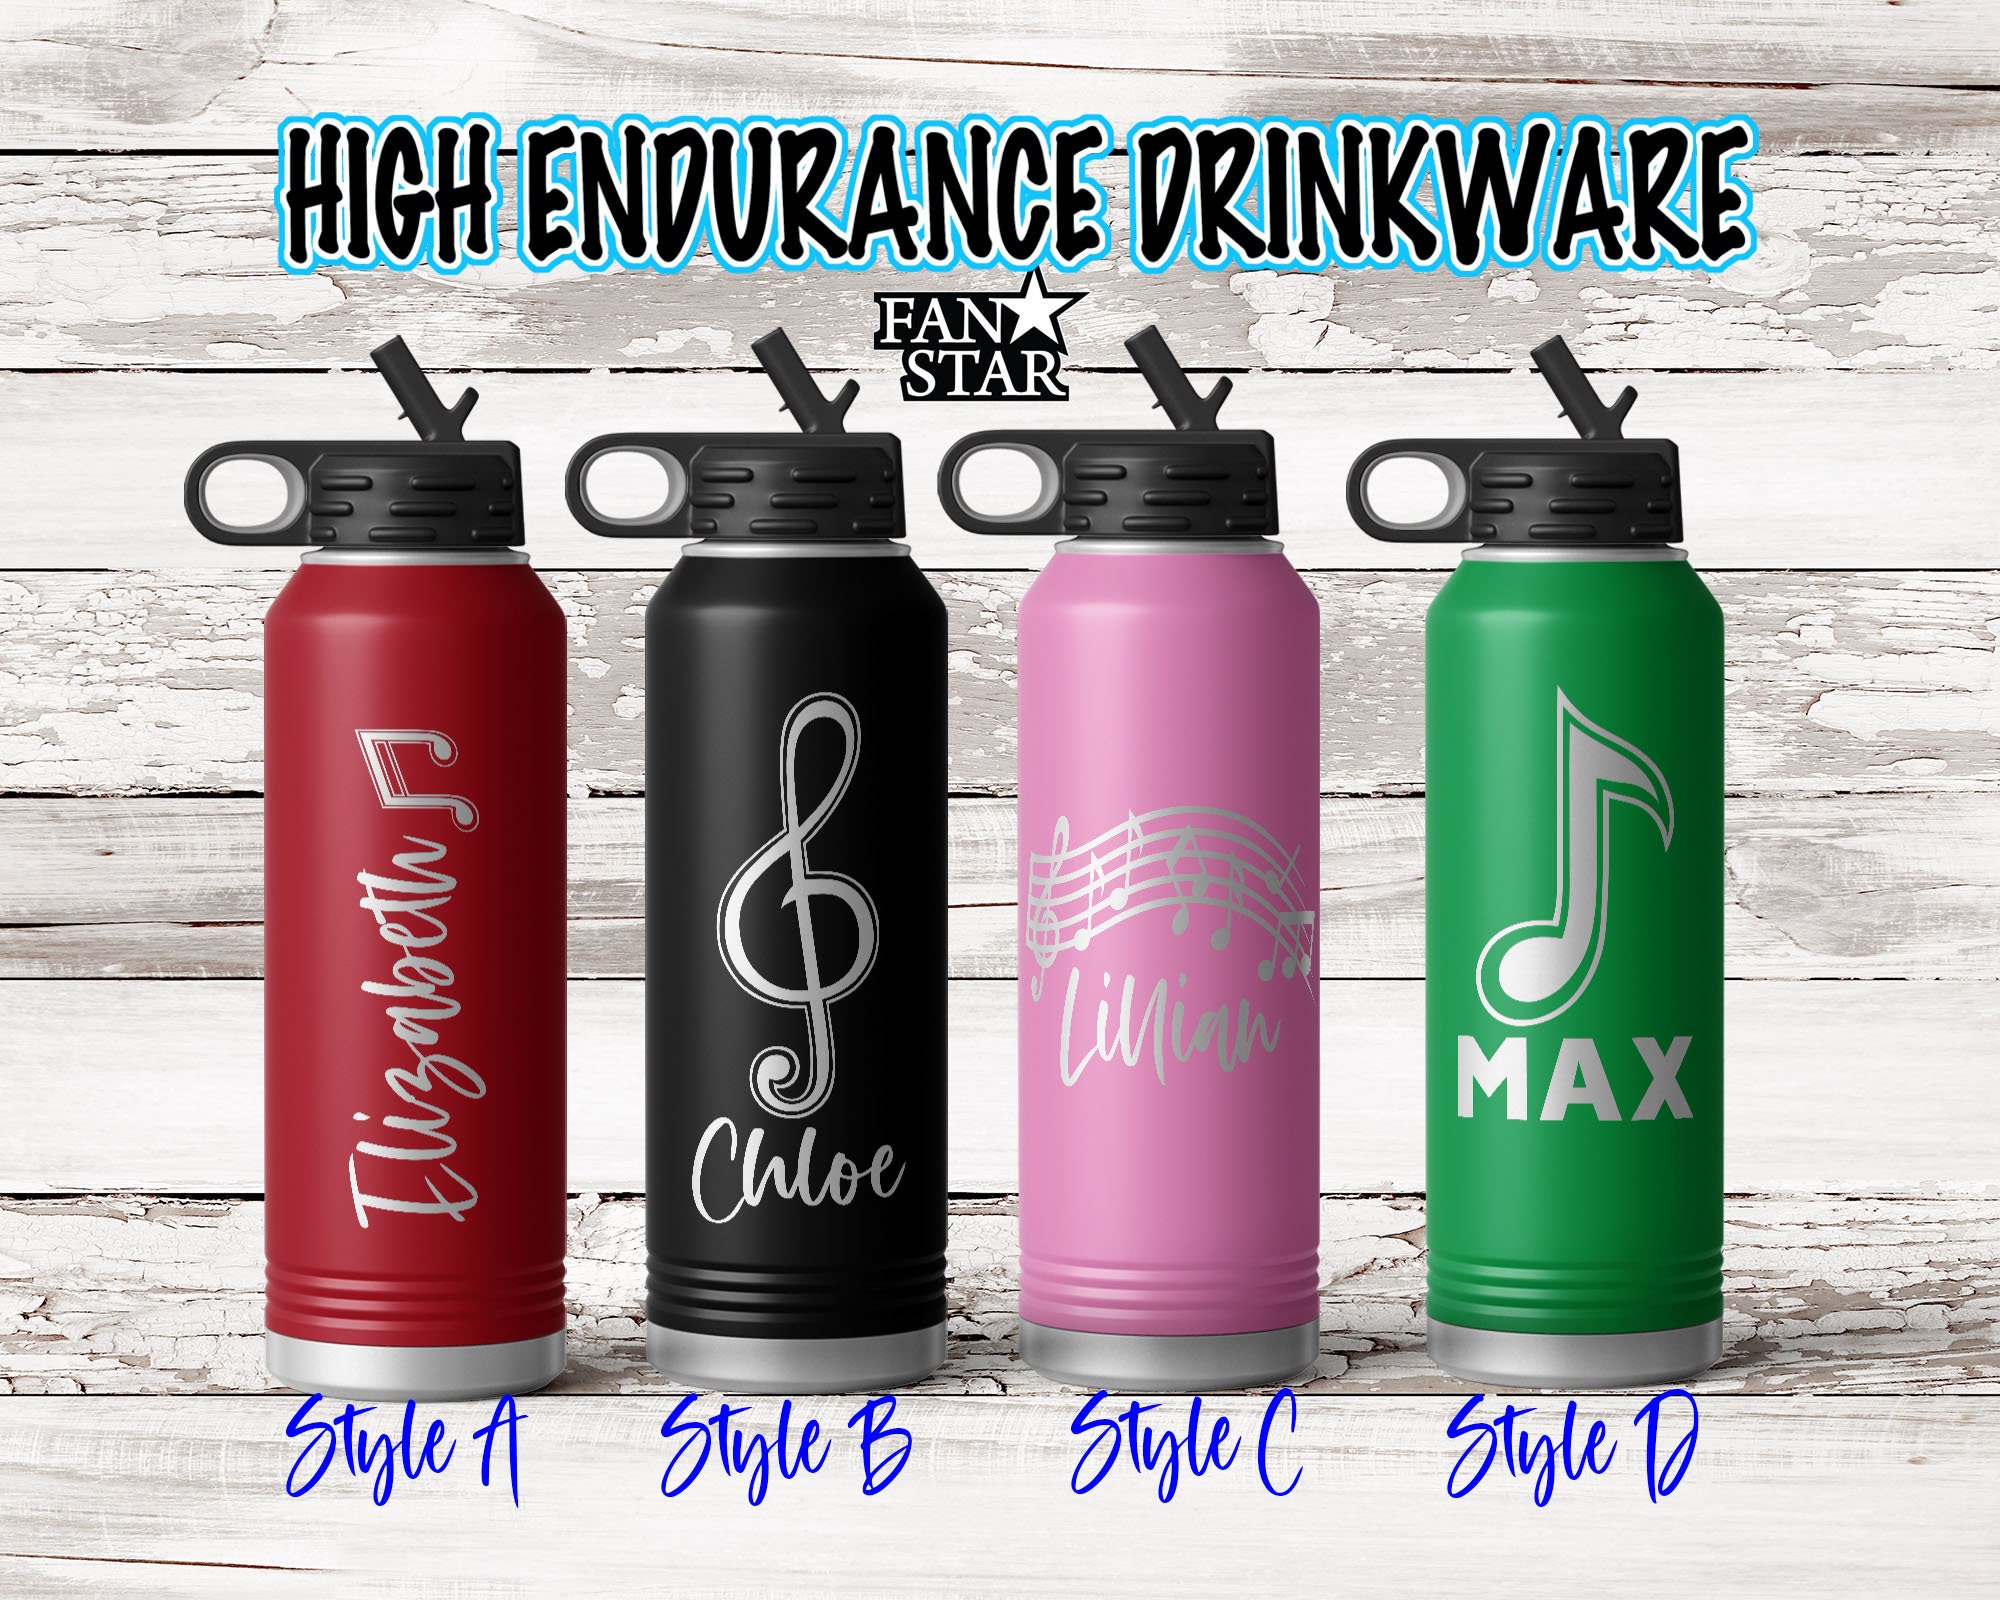 Caisuedawn Personalized Kids Water Bottle with Text, 18oz/32oz Custom Name  Stainless Steel for Boys Girls Water Bottle with Straw Insulated Handle  Waterbottle Gift for Teen School Sports Travel - Yahoo Shopping